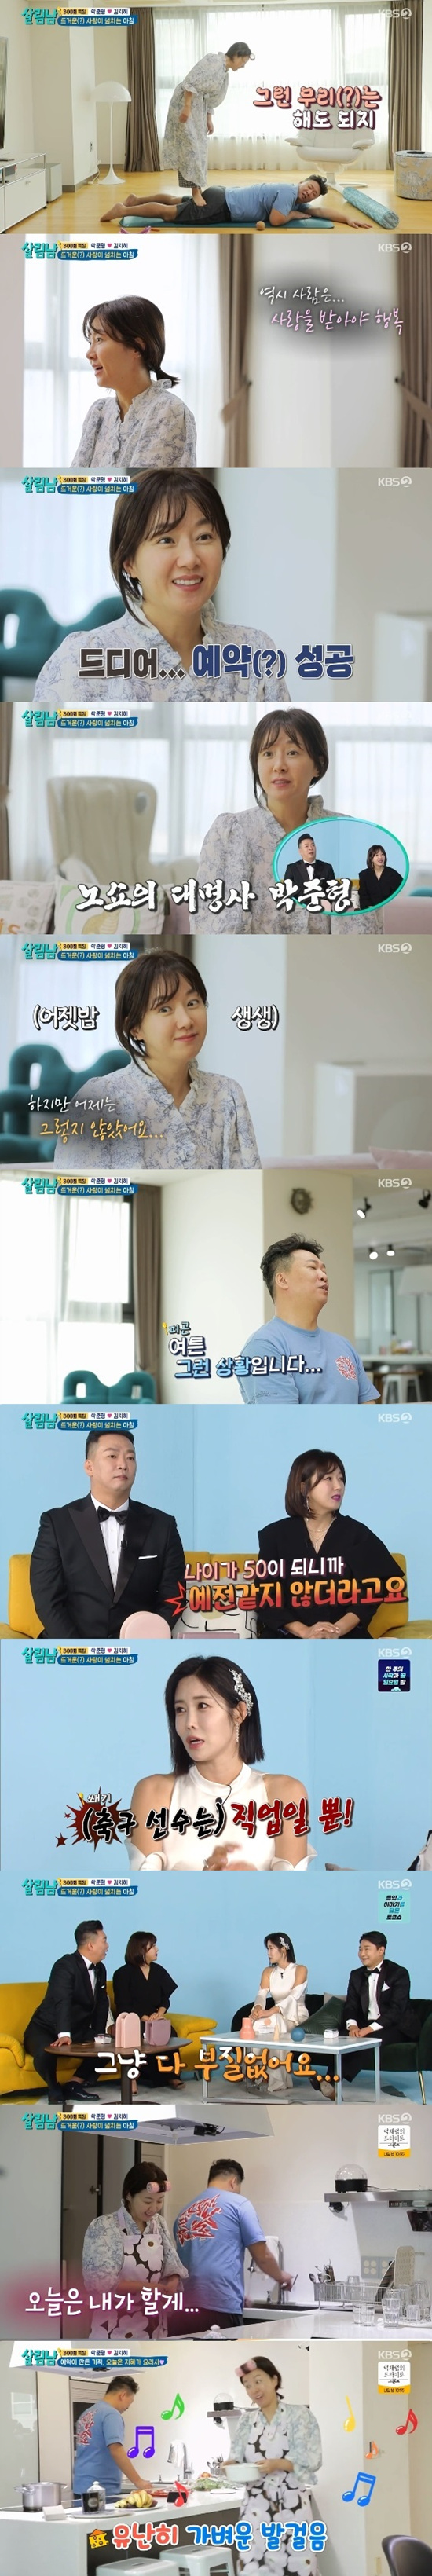 Kim Ji-hye and Joon Park showed the miracle of a hot one night.On KBS 2TV Season 2 of the Living Men broadcasted on the 25th, Kim Ji-hye and Joon Park showed a miracle of hot one night.On this day, Kim Ji-hye was busy doing foot massage for Joon Park with a godly face from the morning. Kim Ji-hye meticulously touched the back of the head and ears of Joon Park.Joon Park said to Kim Ji-hye, How far is your foot?Joon Park asked Shim Ha-eun, who was in the studio for the 300th special, if he had ever given Lee Chun-soo a massage. Shim Ha-eun said, My brother does not like touching his body.Lee Chun-soo was embarrassed by Shim Ha-euns story.Joon Park gave Kim Ji-hye a massage and said, Honey, do not overdo it. Kim Ji-hye laughed, saying, You can do such a crowd.When the production team asked, The atmosphere in the house was love-loving, Kim Ji-hye said, Is that obvious? I think people are happy only when they are loved. I finally made a reservation, confessing that she spent one hot night the previous day.Joon Park is the epitome of a real no-show, but yesterday it wasnt, Kim said with a smile.Lee Chun-soo said Joon Park looked very tired, and Kim Ji-hye said, Its not like it used to be when I was 50 years old. Soccer players dont have that, right? They used to work out, whether it was 50 or 60.Shim Ha-eun thought for a moment and said, Its all the same, adding, Football players are just jobs. Joon Park said, This is really fun. I was really curious about this.Lee Chun-soo tried to say his position, No, I have an Imfact, but Shim Ha-eun interrupted and said, What Imfact?Joon Park, who received a foot massage from Kim Ji-hye, went to the kitchen to prepare breakfast as usual. Ill do it today. I was thinking about doing it, Kim said.Joon Park said, Why is the service so good? In an interview with the production crew, There is nothing wrong with the old adults. Do not you give rice to the meat dishes?I think its similar, he said.Photo: KBS broadcast screen